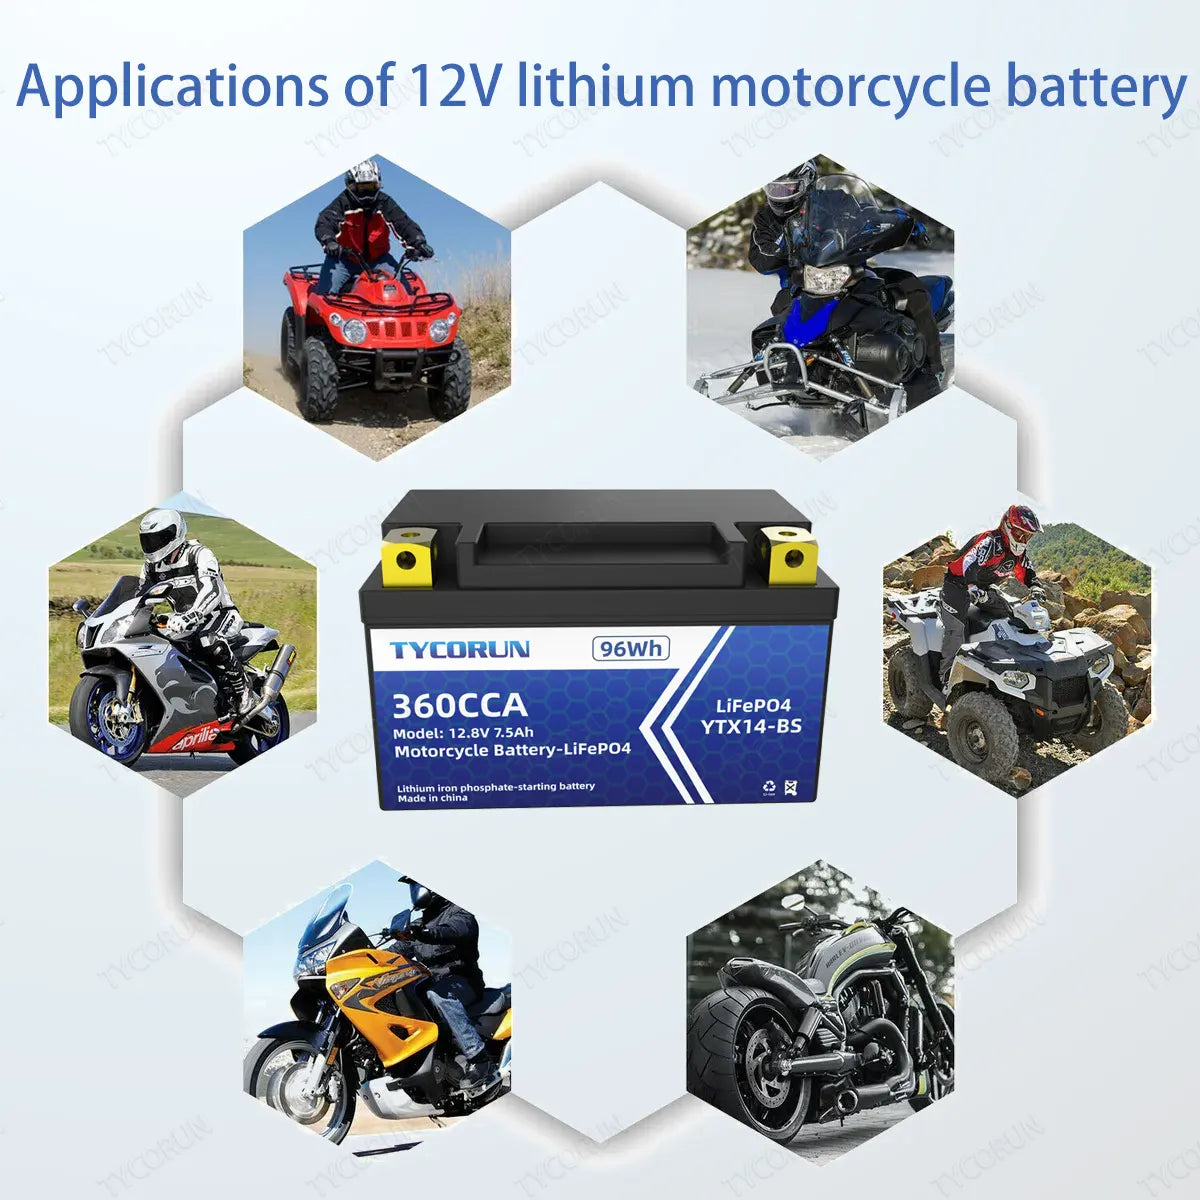 Applications-of-12V-lithium-motorcycle-battery